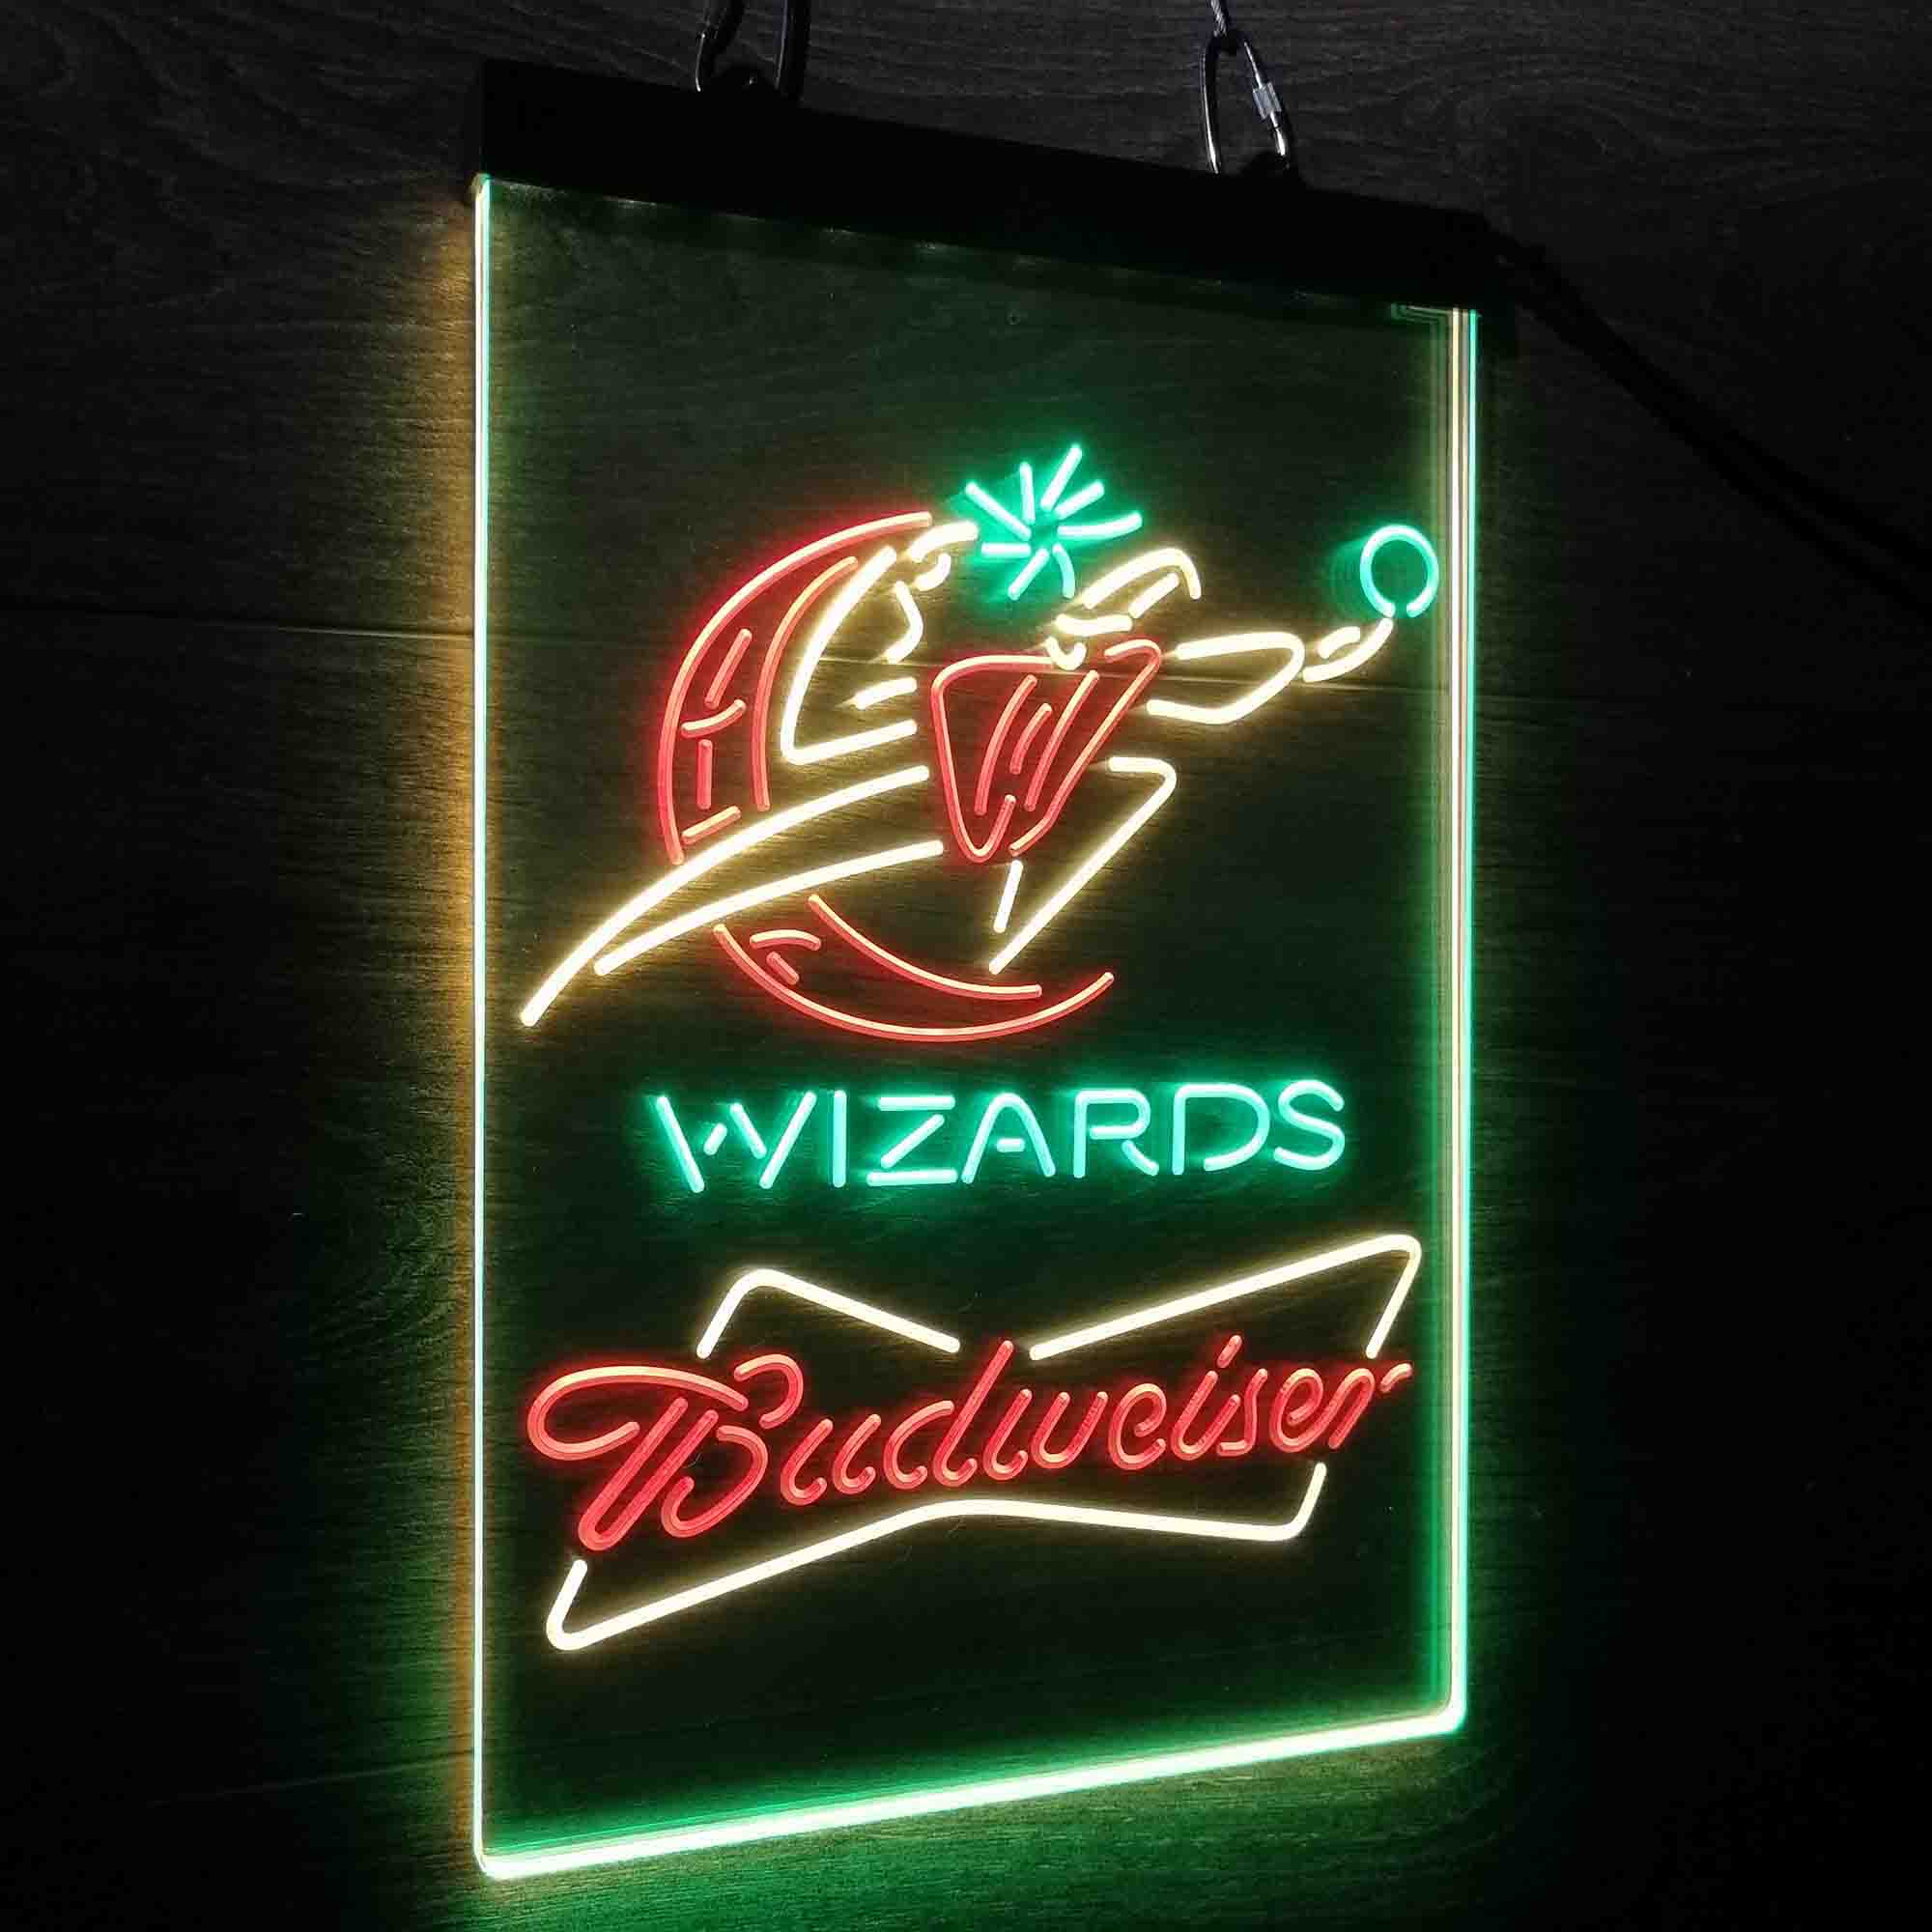 Wizards Nba Budweiser Neon LED Sign 3 Colors